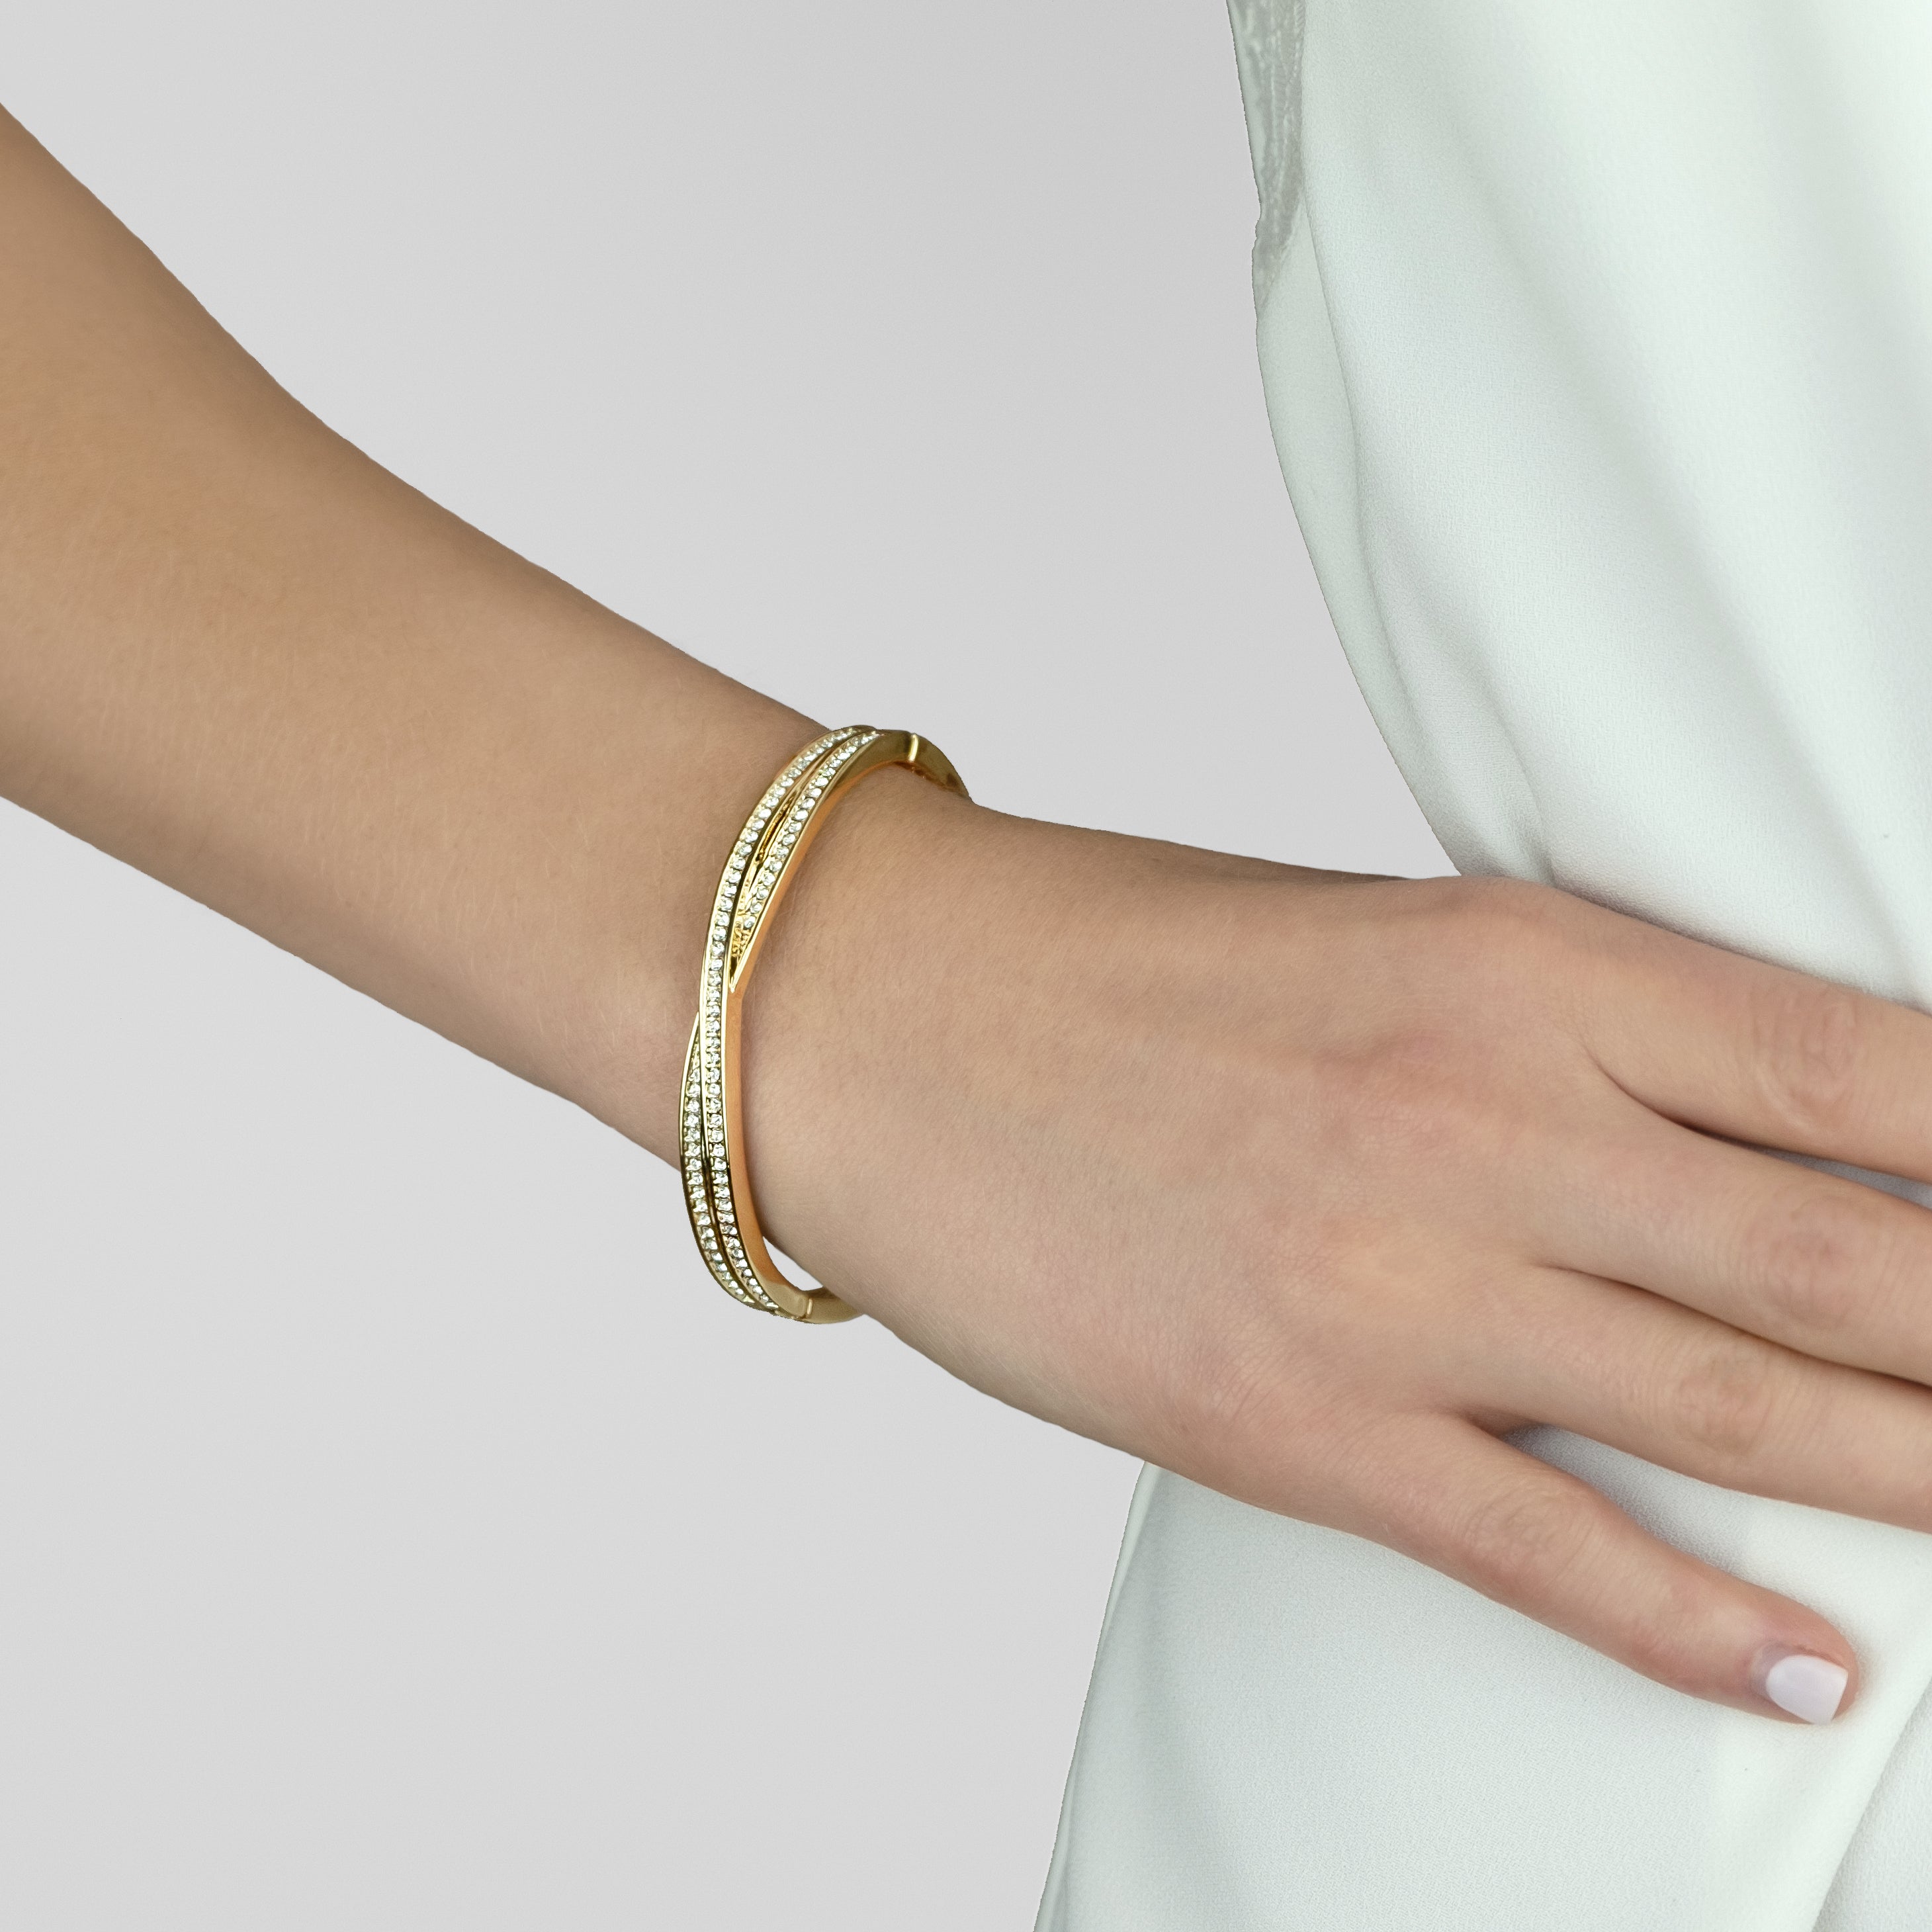 Criss Cross Bangle in Yellow Gold Plating